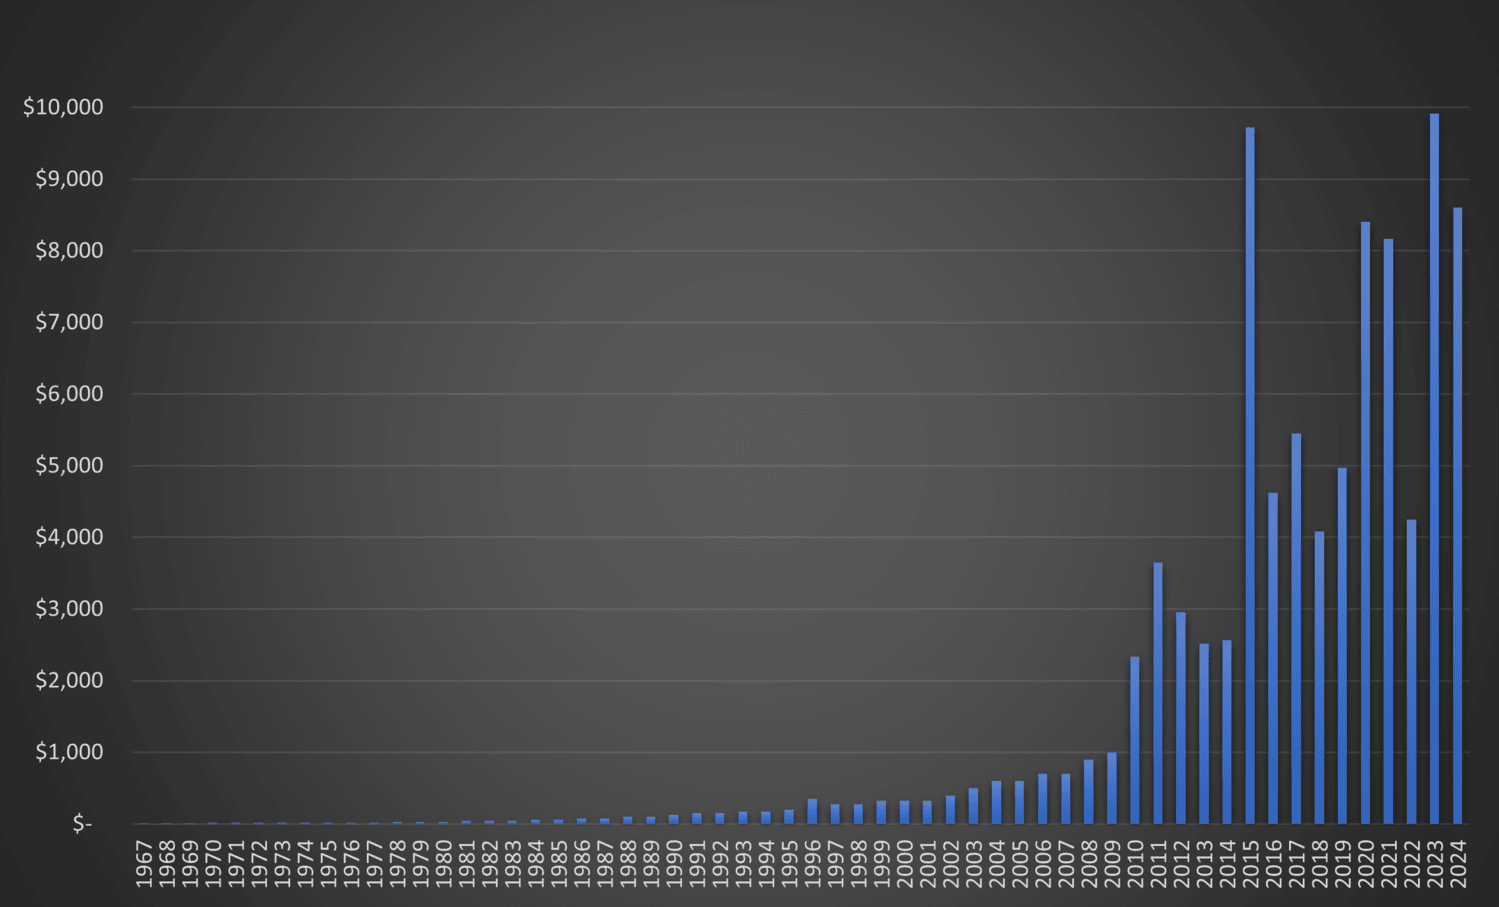 Casino.org graph showing average price of Super Bowl tickets 1967-2024